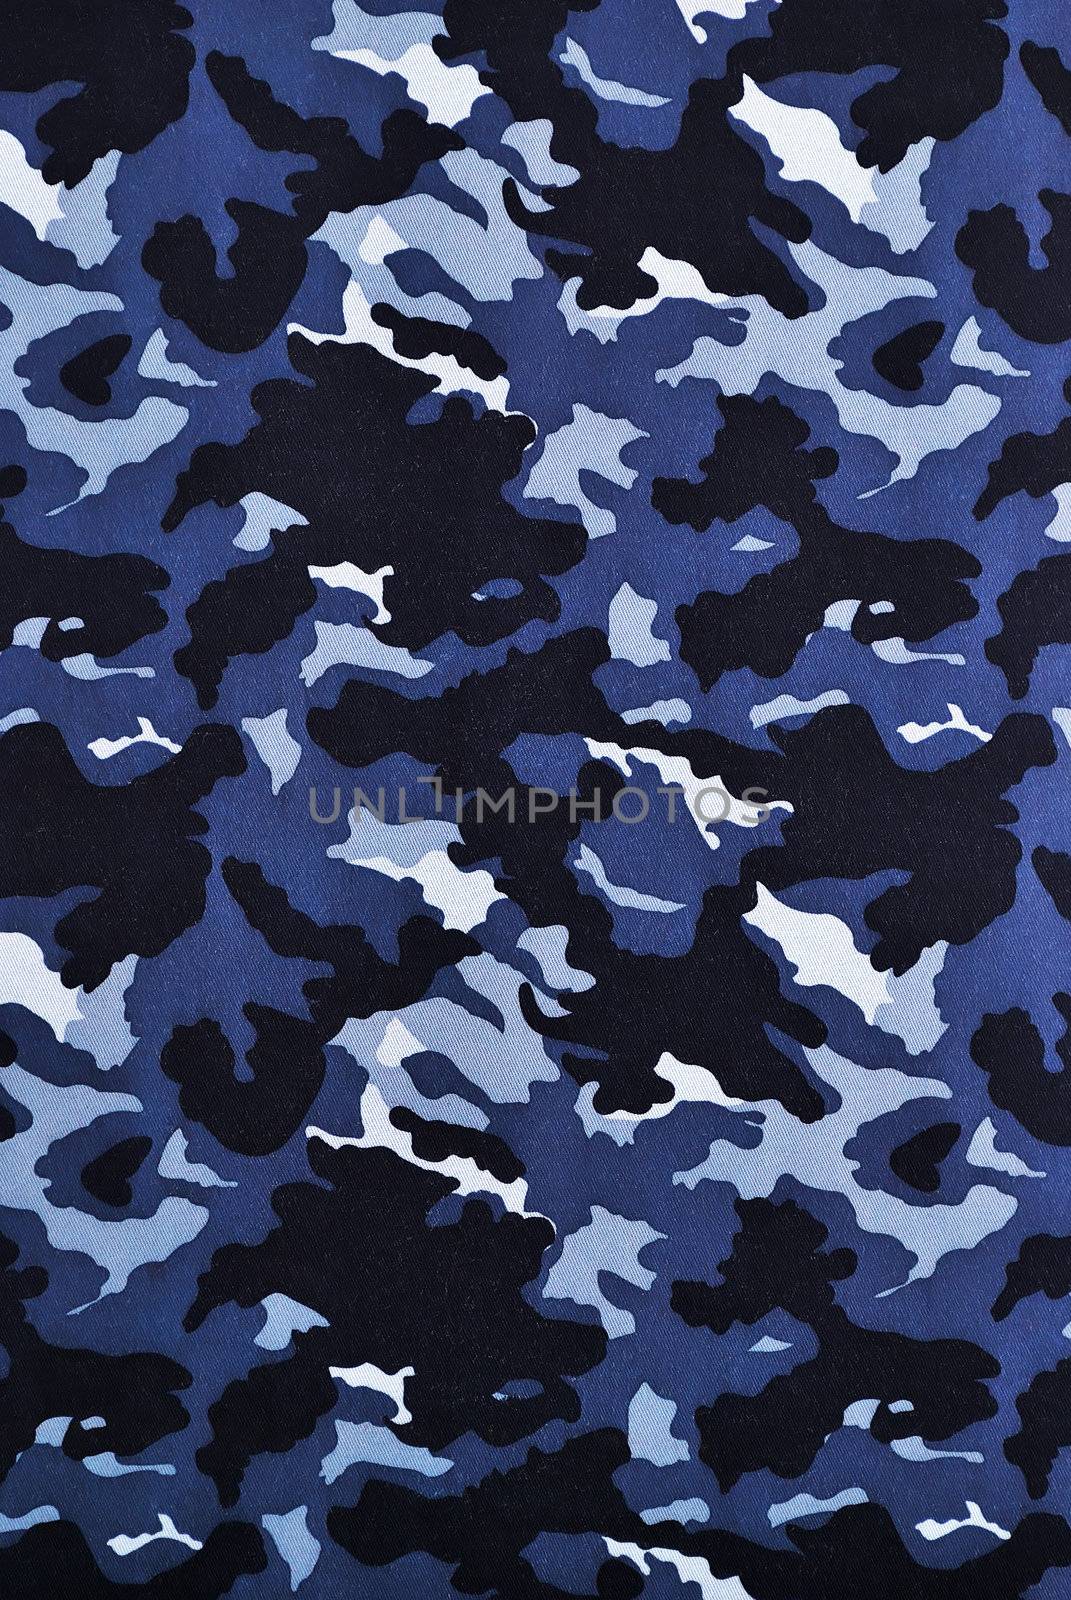 blue camouflage fabric in a vertical orientation